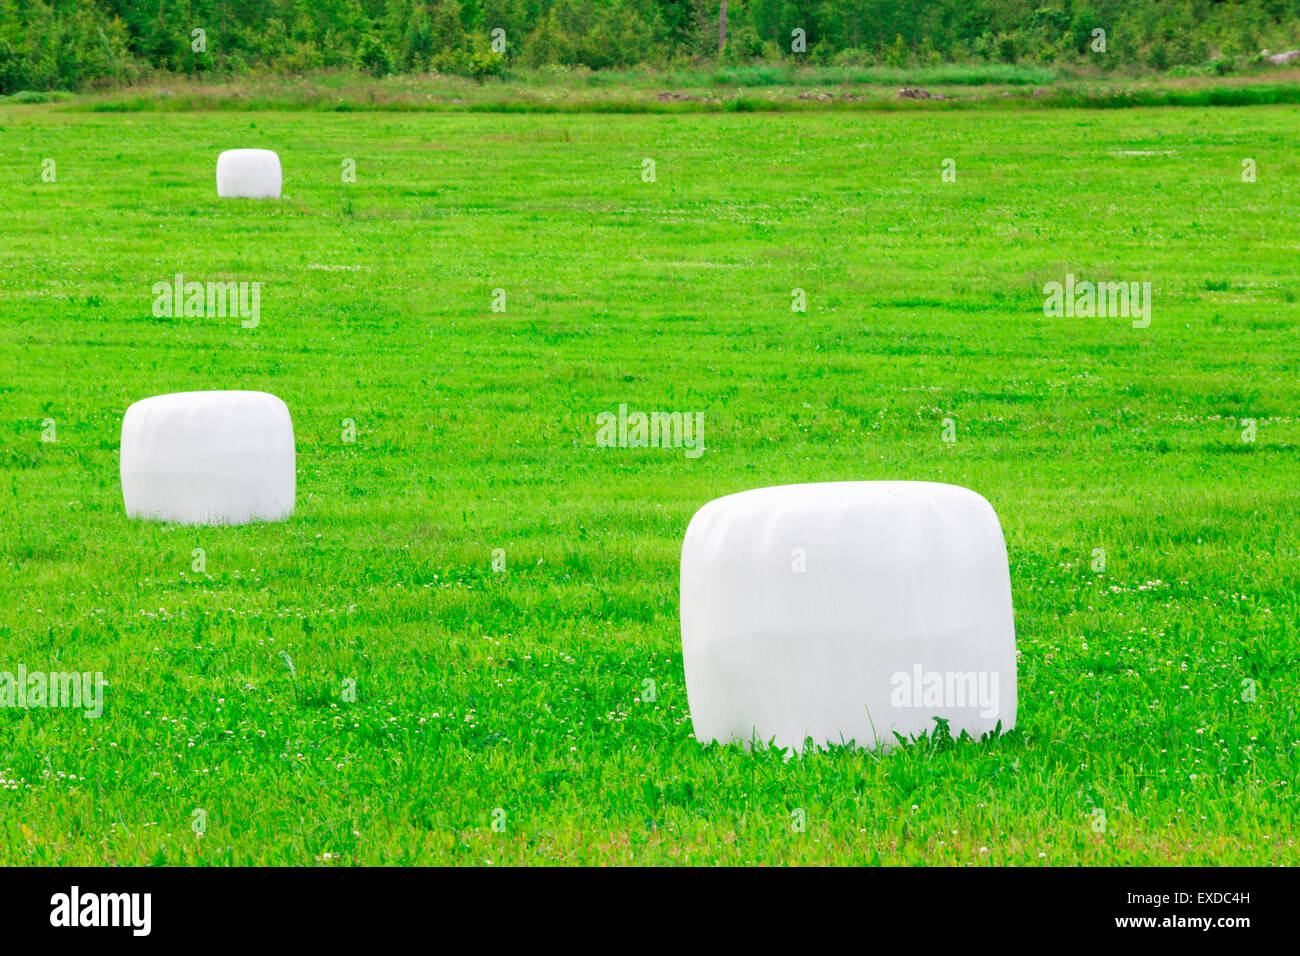 Grass in plastic Silage Balls in Sweden Stock Photo